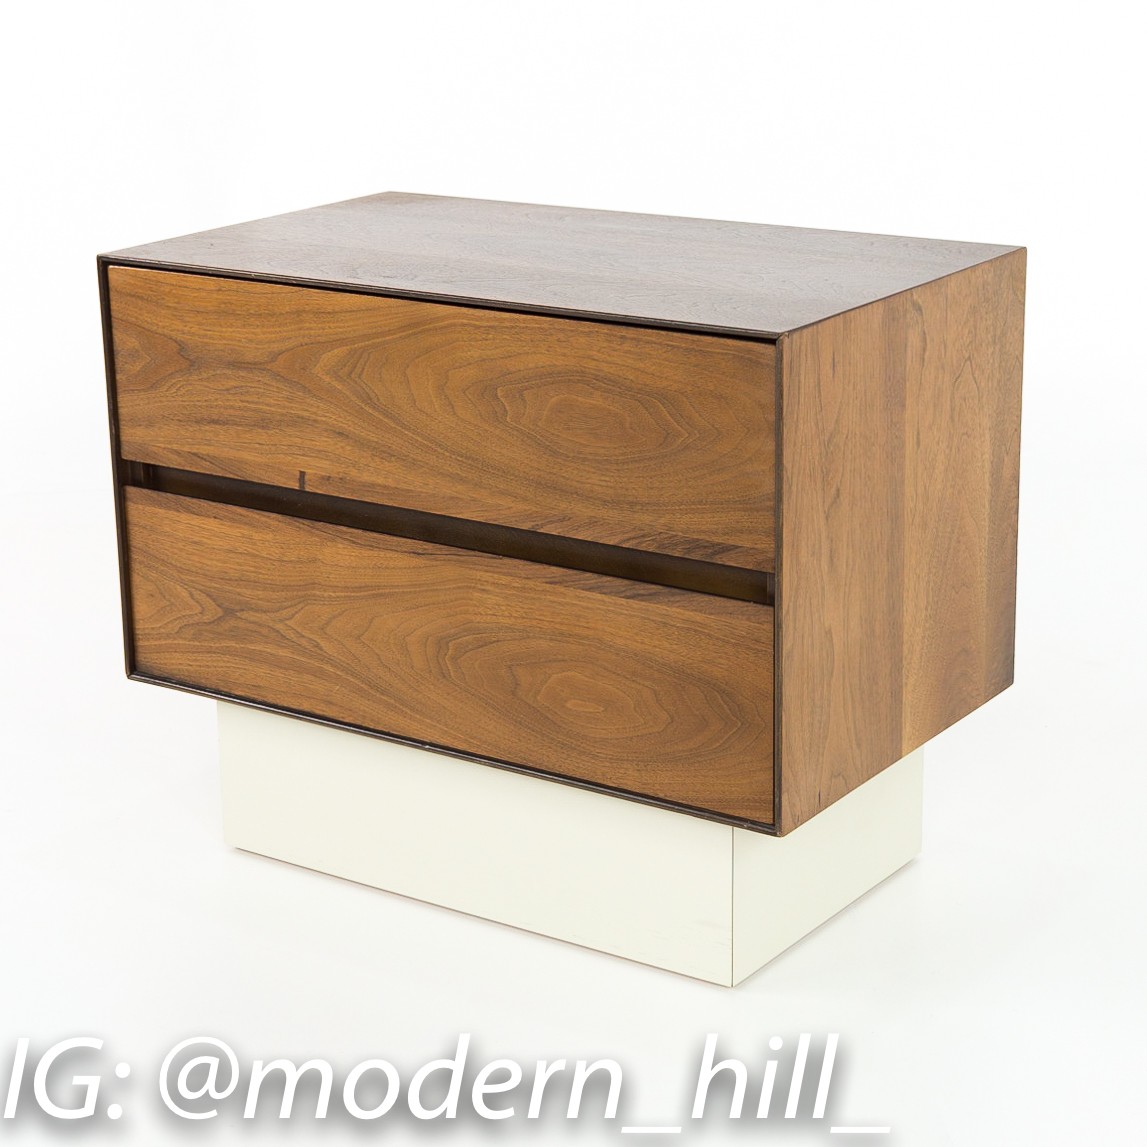 H Paul Browning for Stanley Furniture Walnut and Rosewood Thin Edge Platform Nightstands - Matching Pair